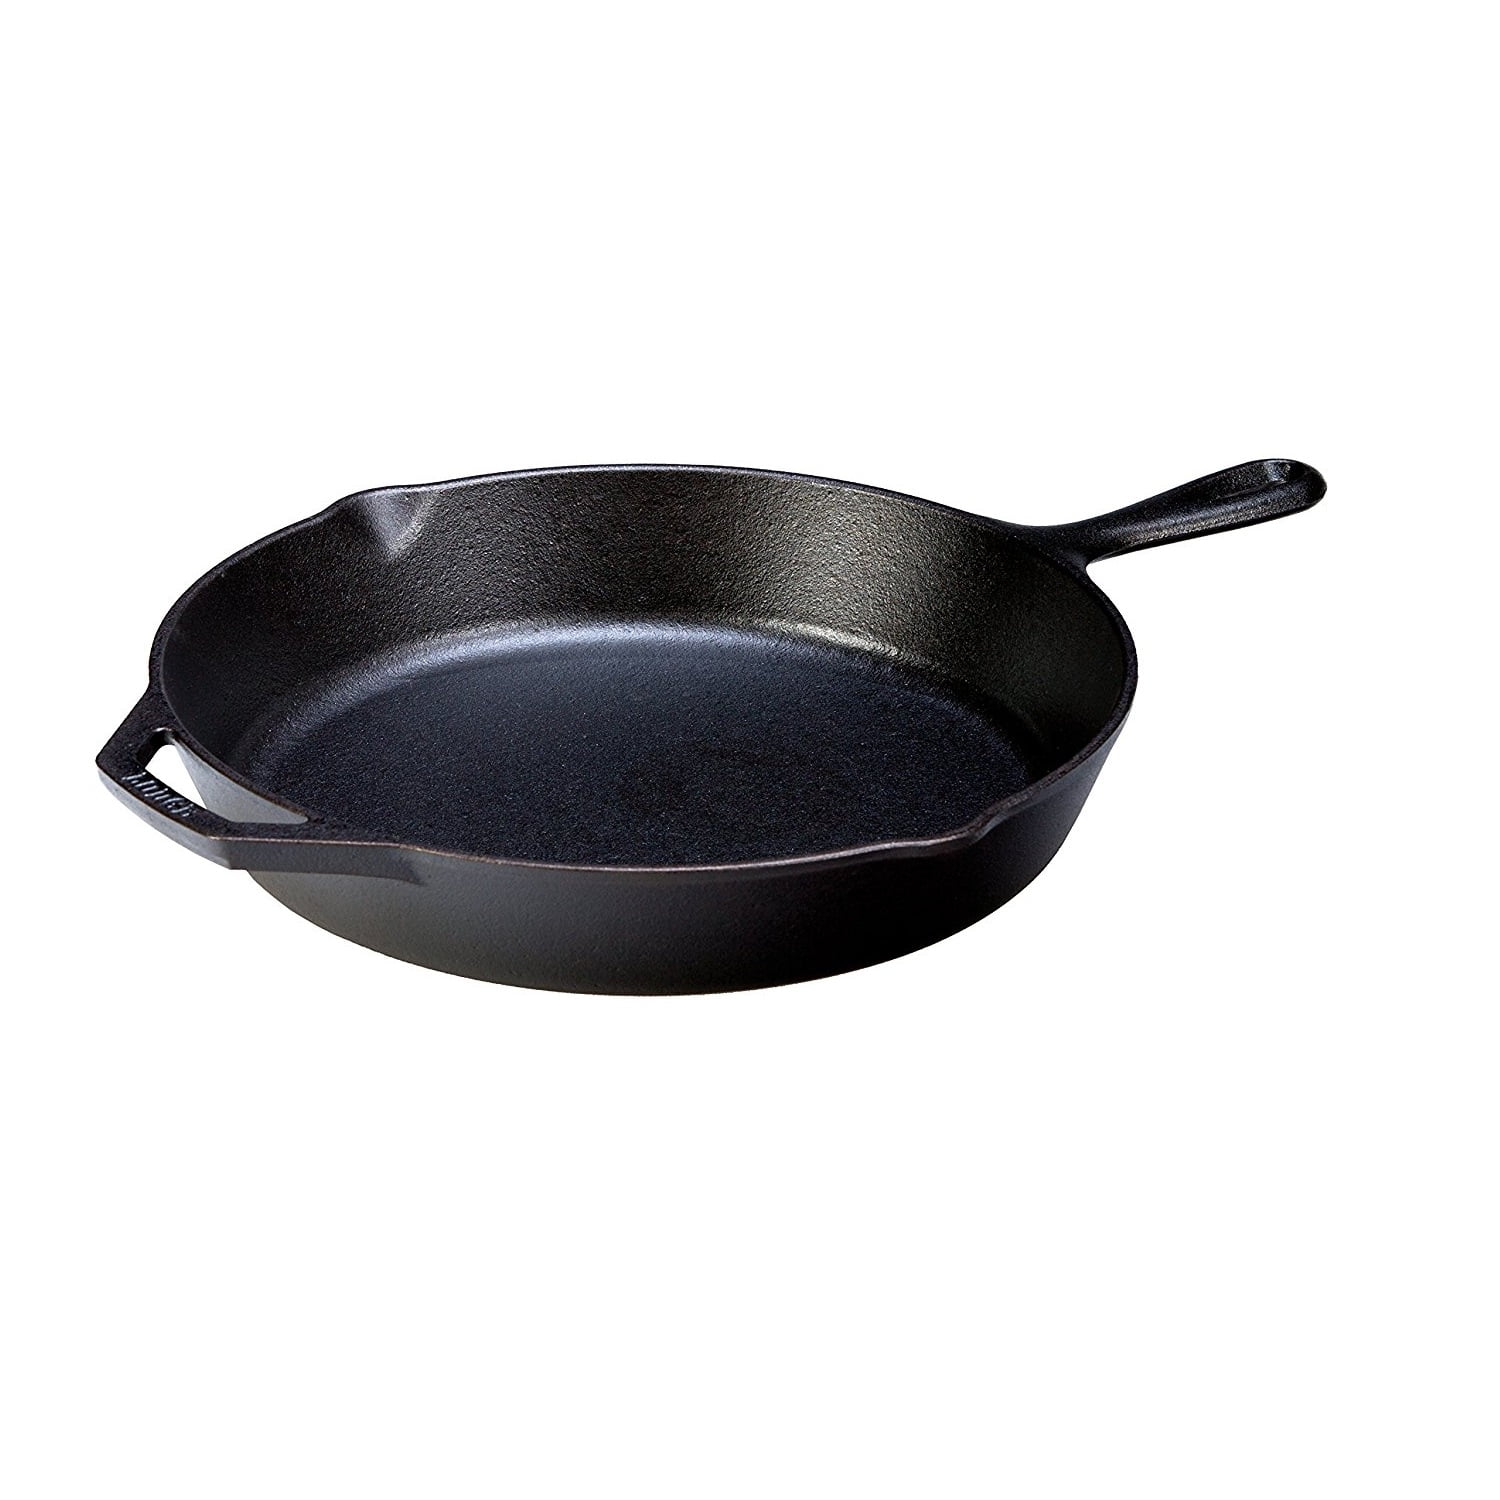 CAST IRON - HISTORY AND WONDERS!